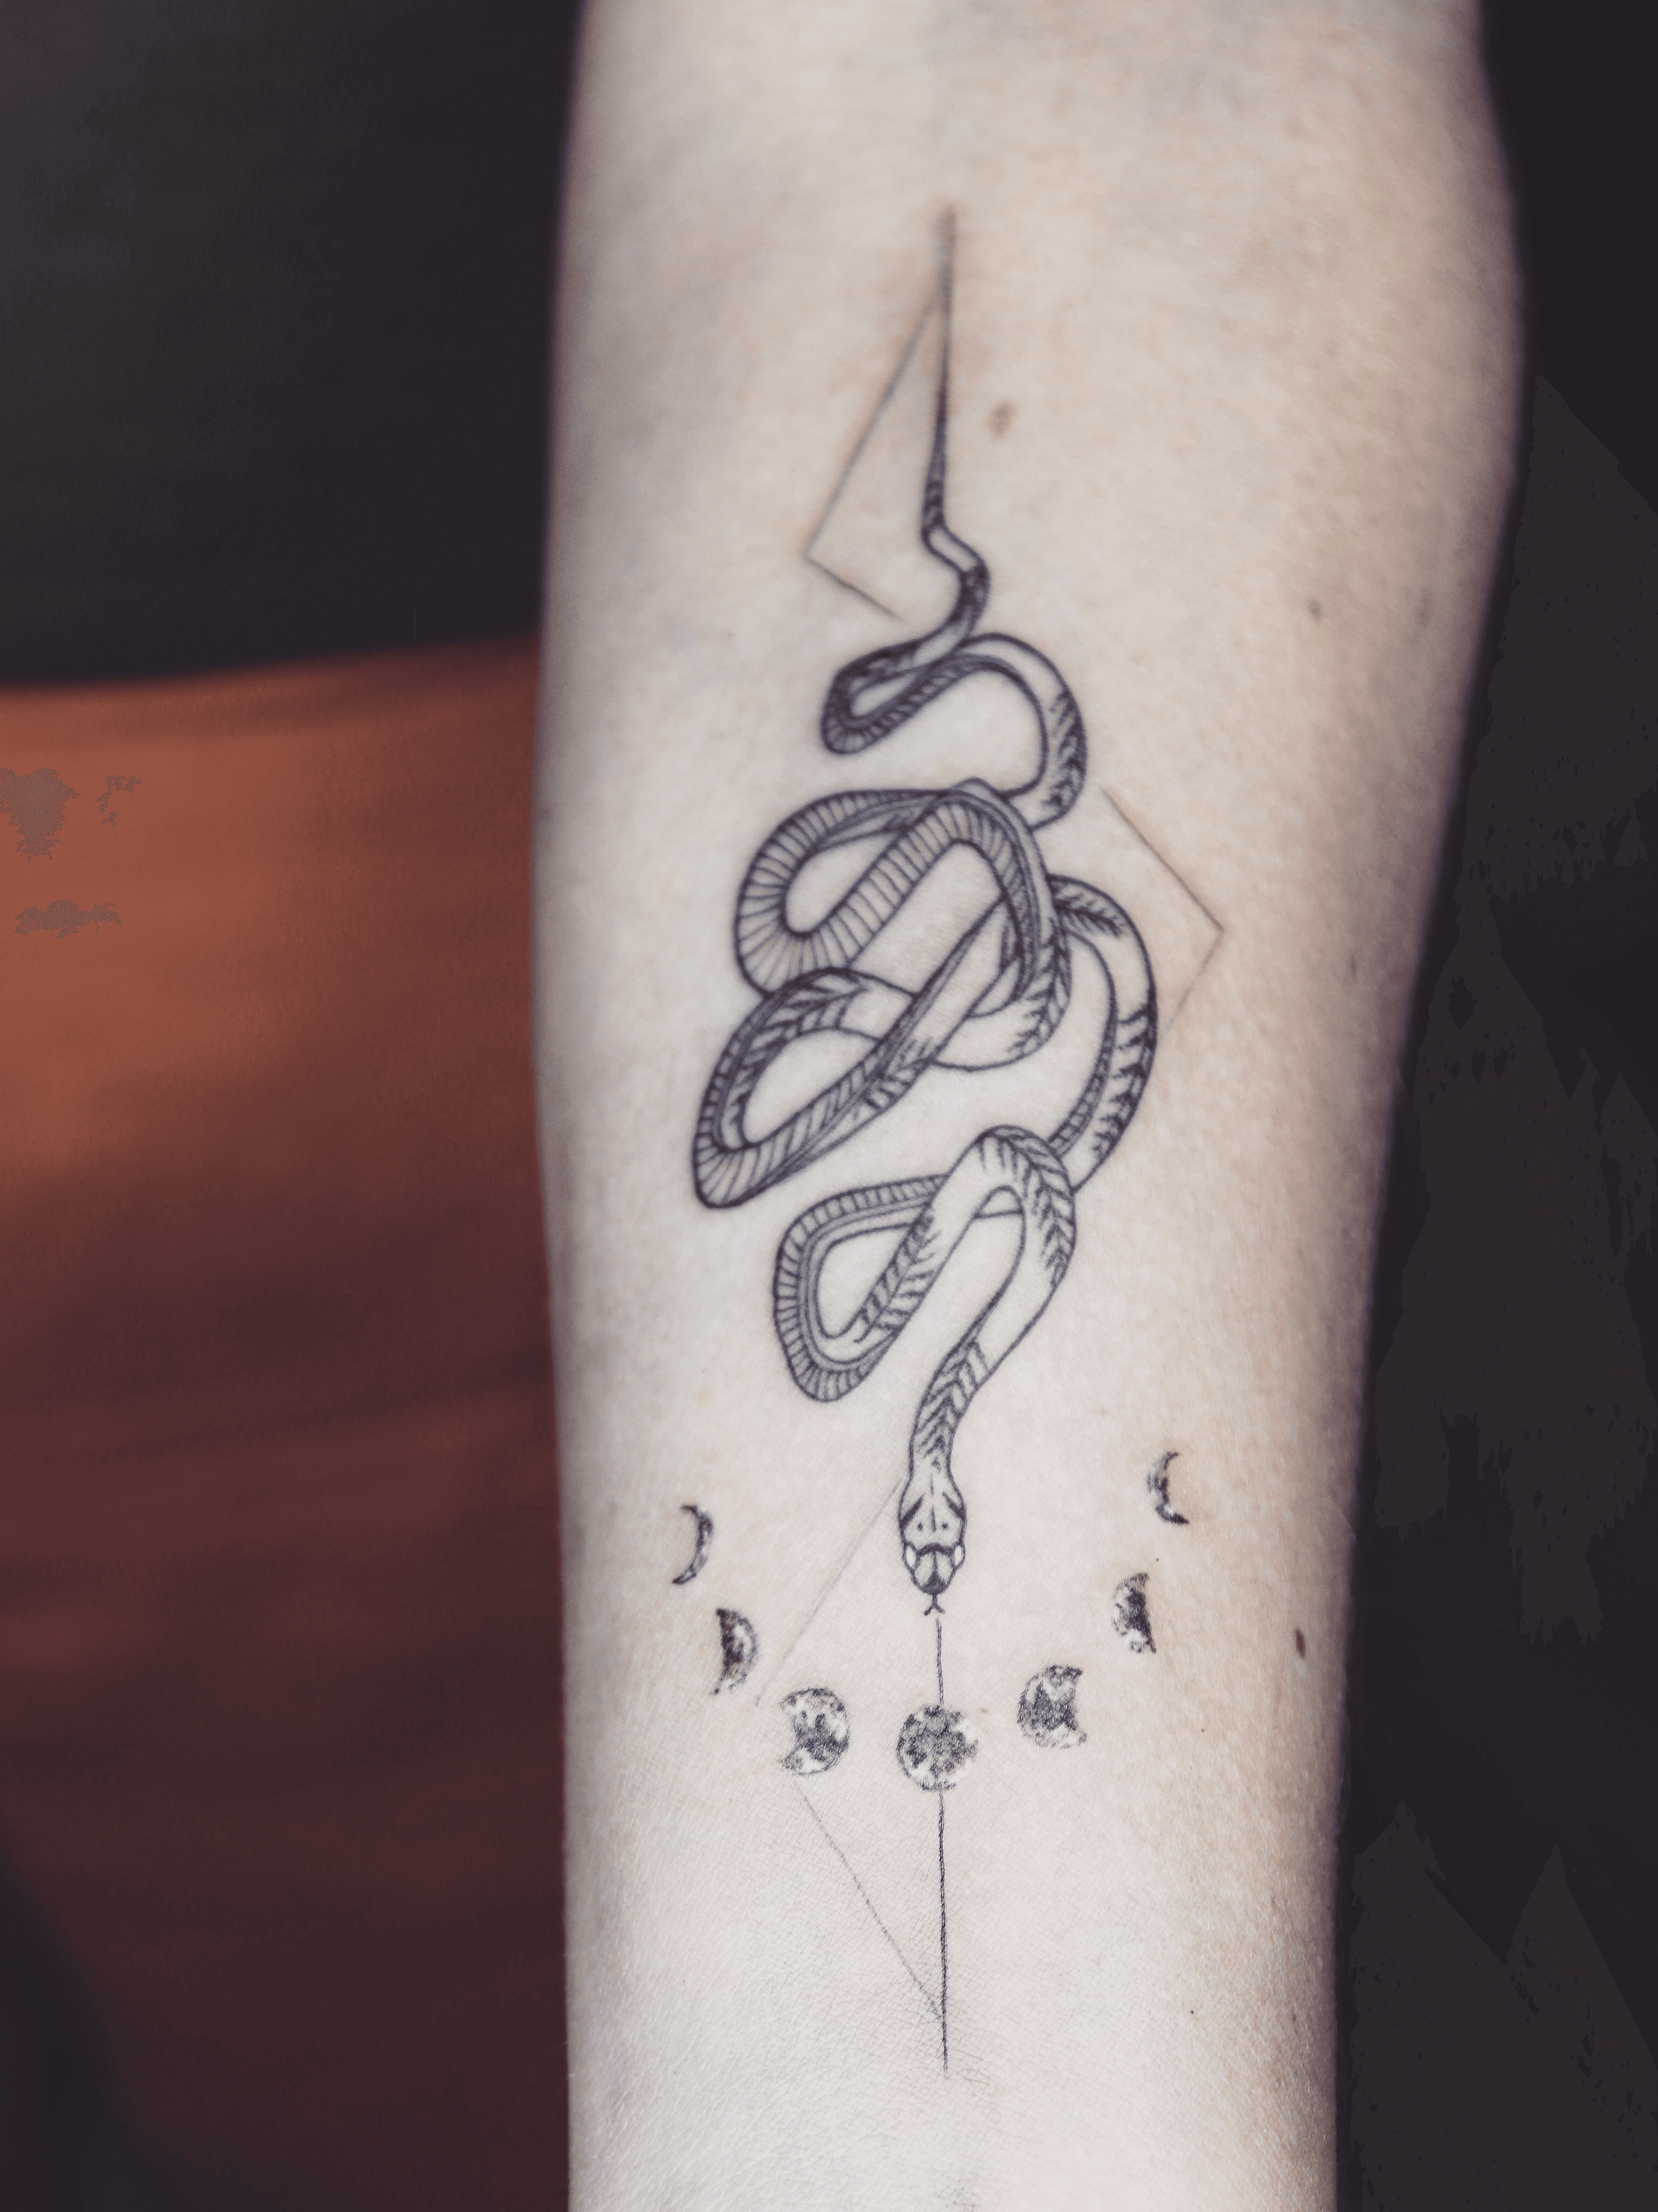 Snakes Tattoo Meaning Exploring Tattoo Meanings and Their Cultural  Significance  Impeccable Nest